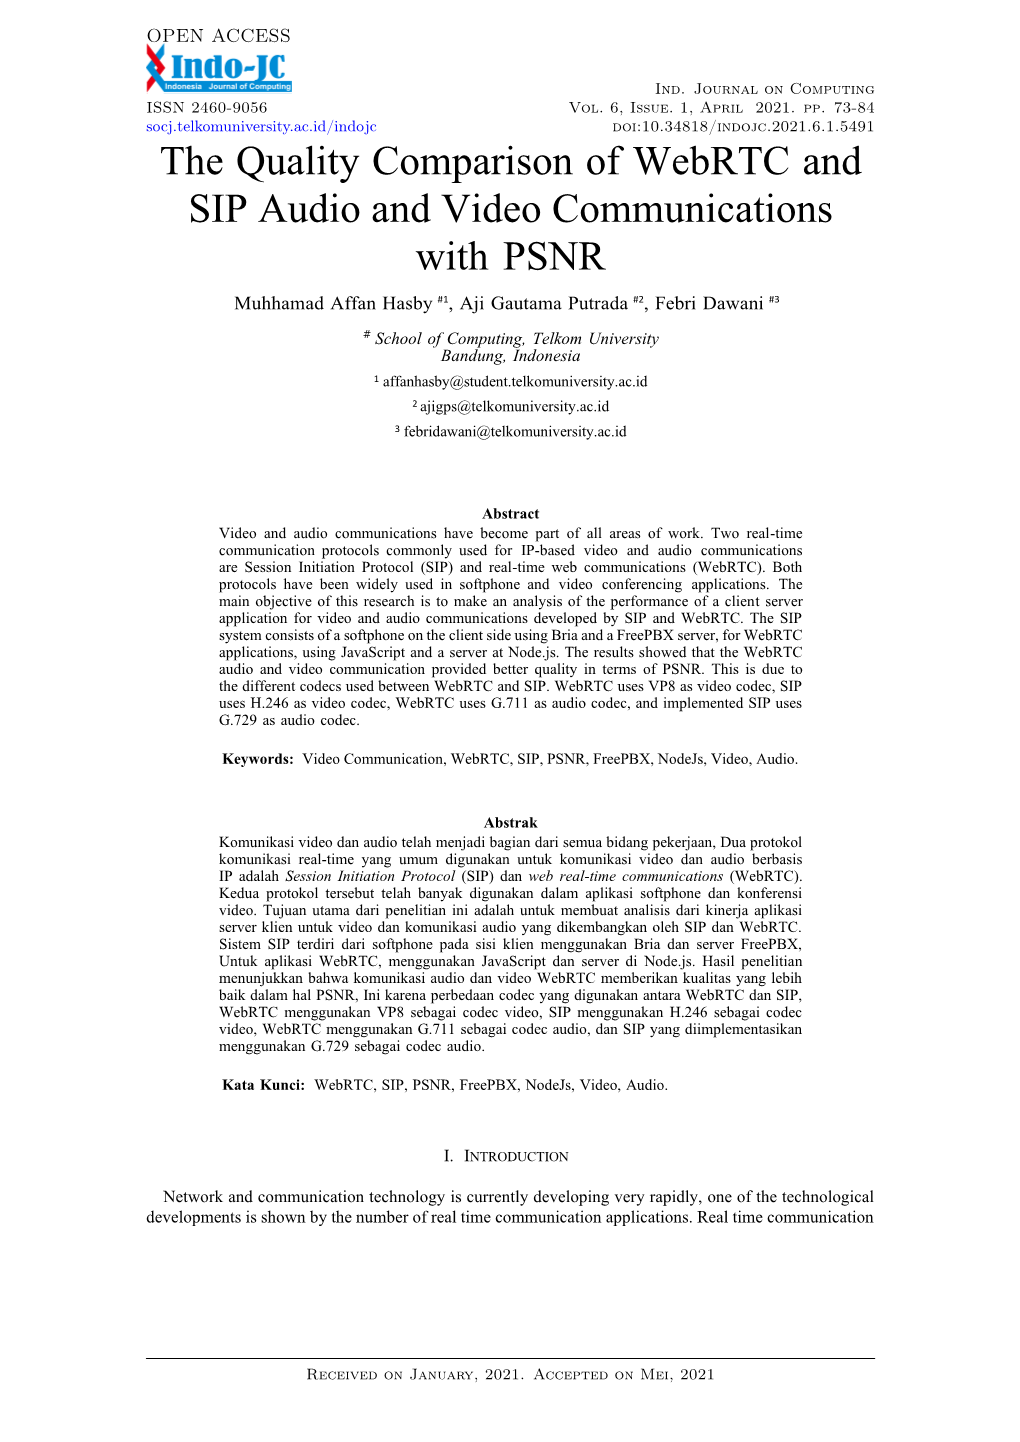 The Quality Comparison of Webrtc and SIP Audio and Video Communications with PSNR